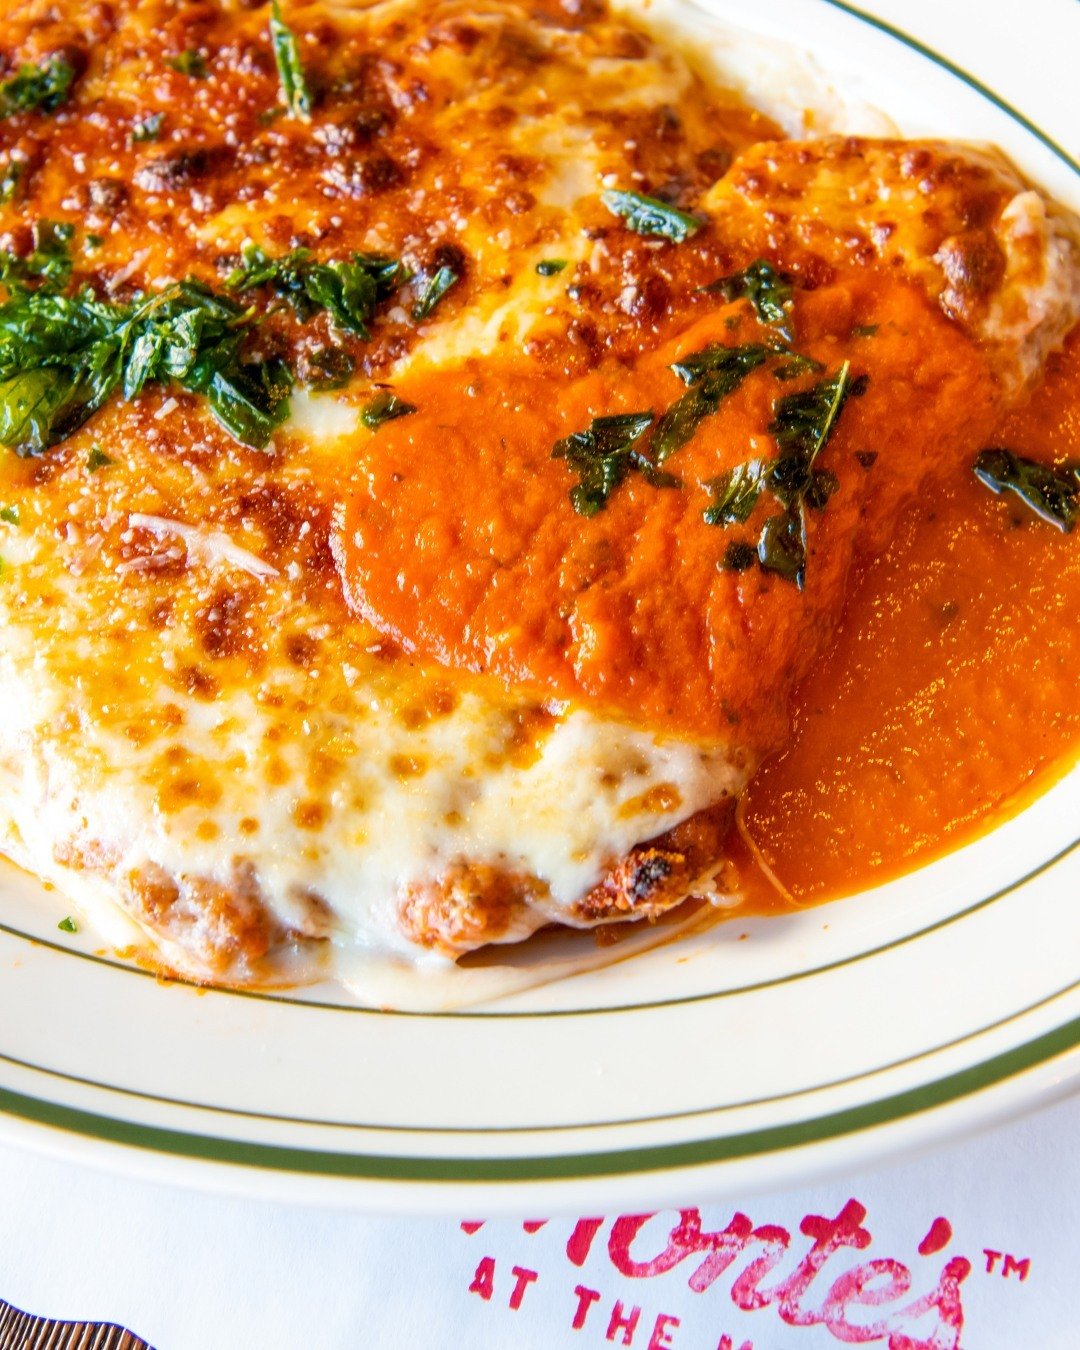 Monte's Chicken Parm - the stuff dreams are made of. Make your reservation today at MontesManor.com⁠
⁠
#chickenparm #chickenparmesean #montauk